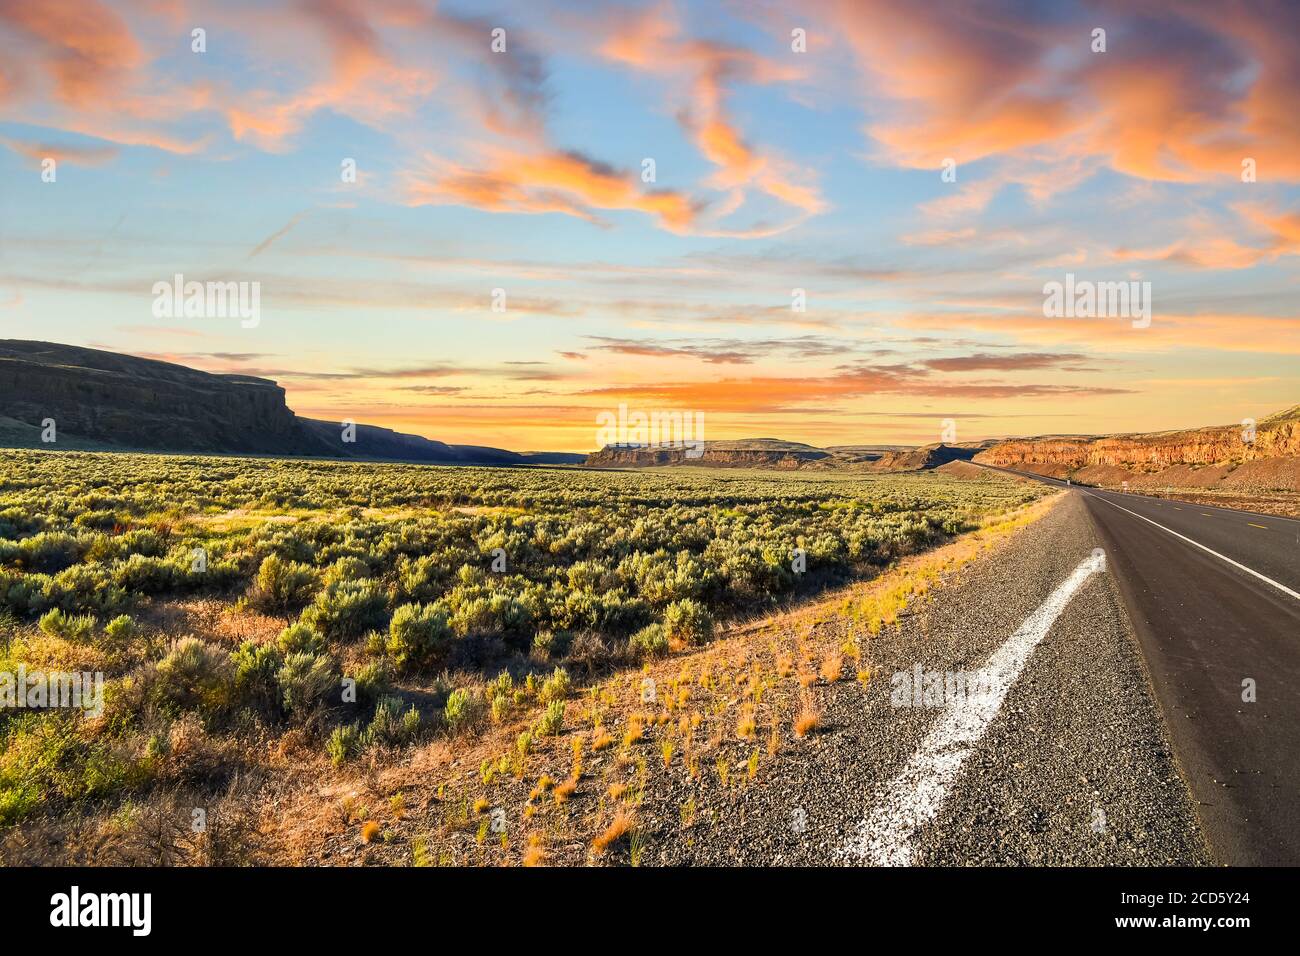 Sunset in the high desert and mountains of the Pacific Northwest near Wenatchee, Washington, in the United States. Stock Photo